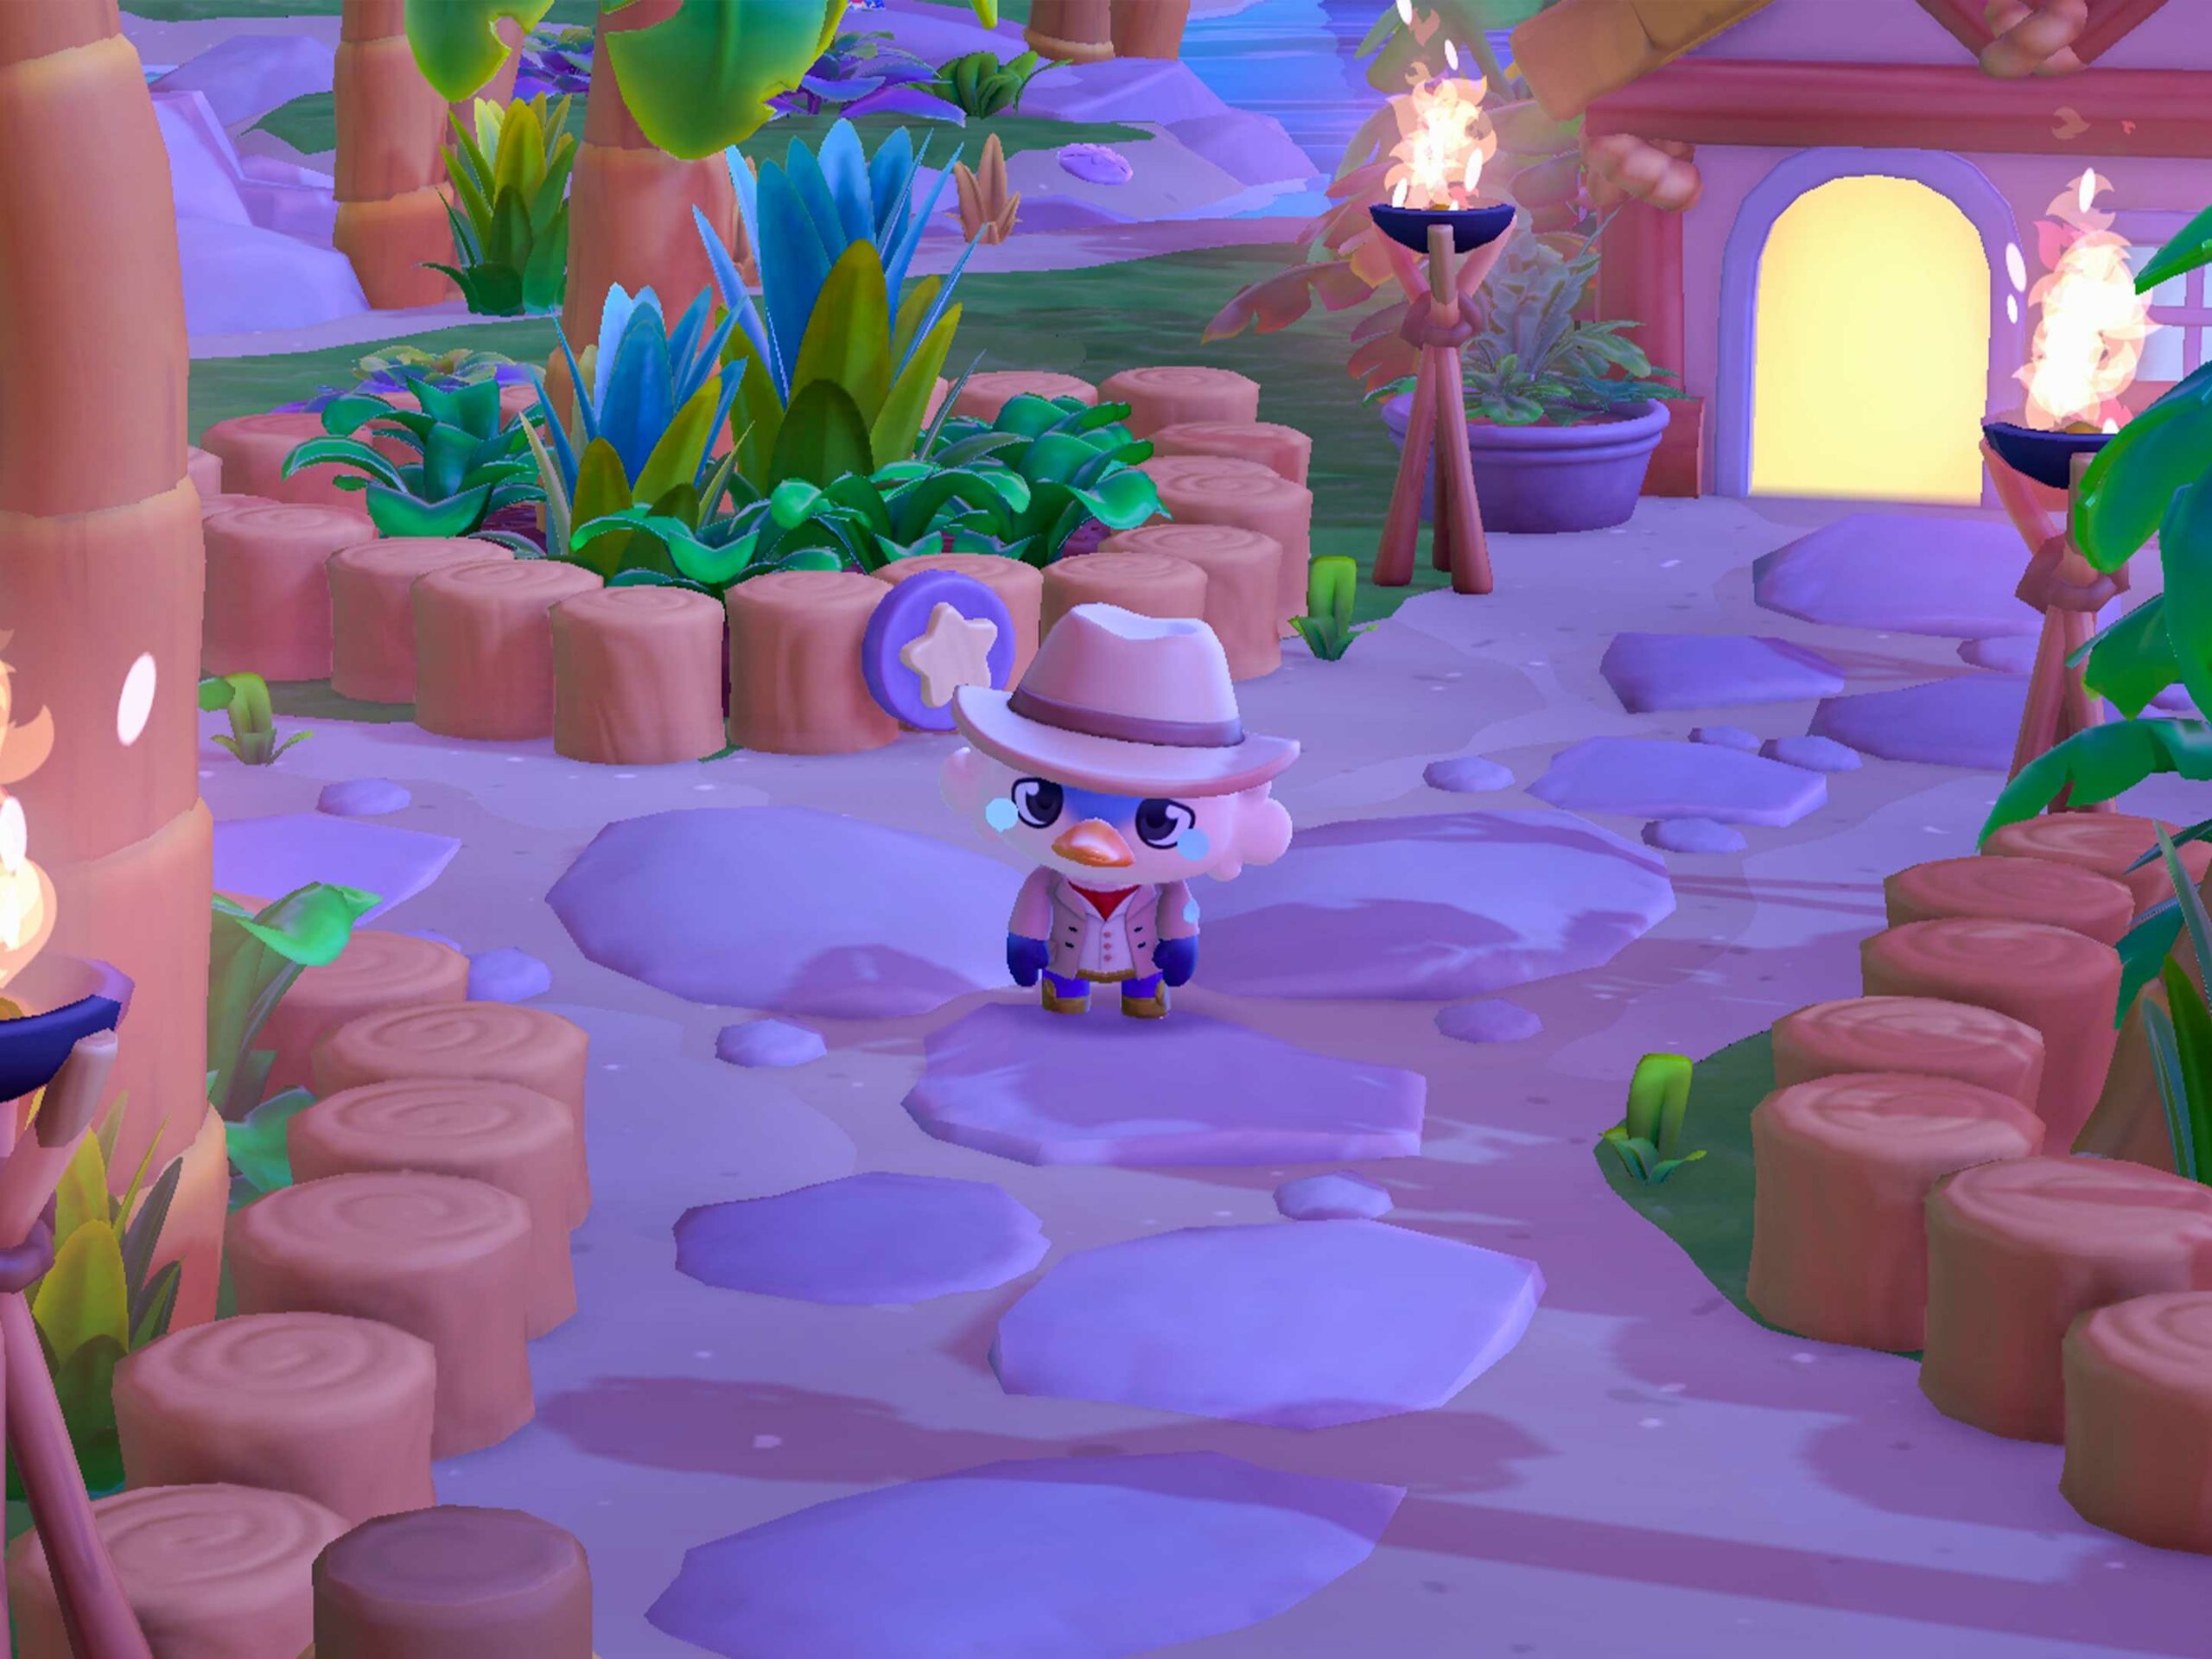 Hello Kitty Island Adventure review – a tropical paradise